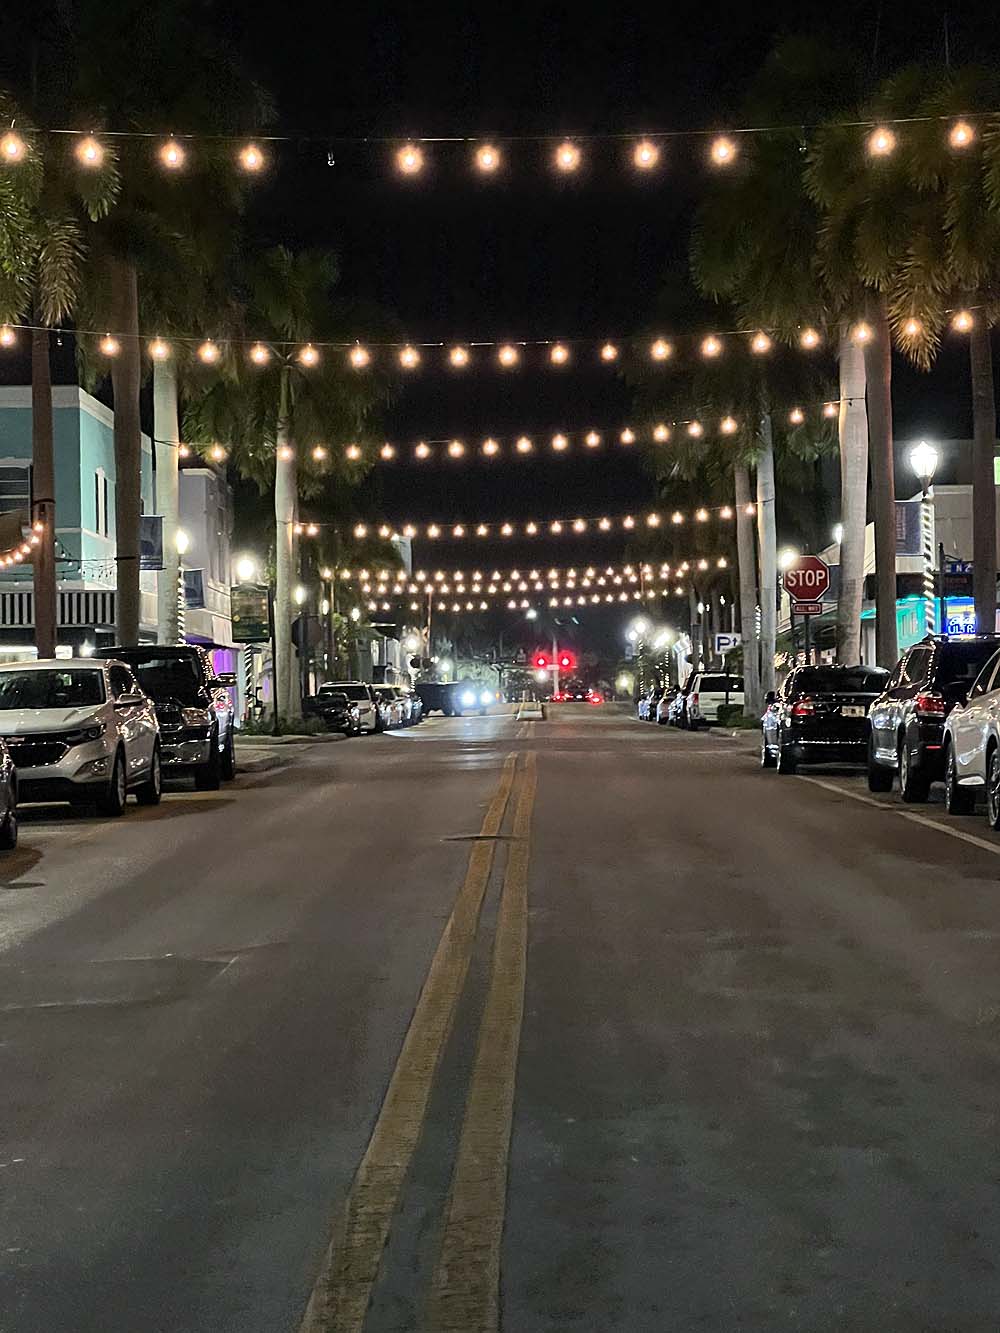 Downtown Ft Pierce at night